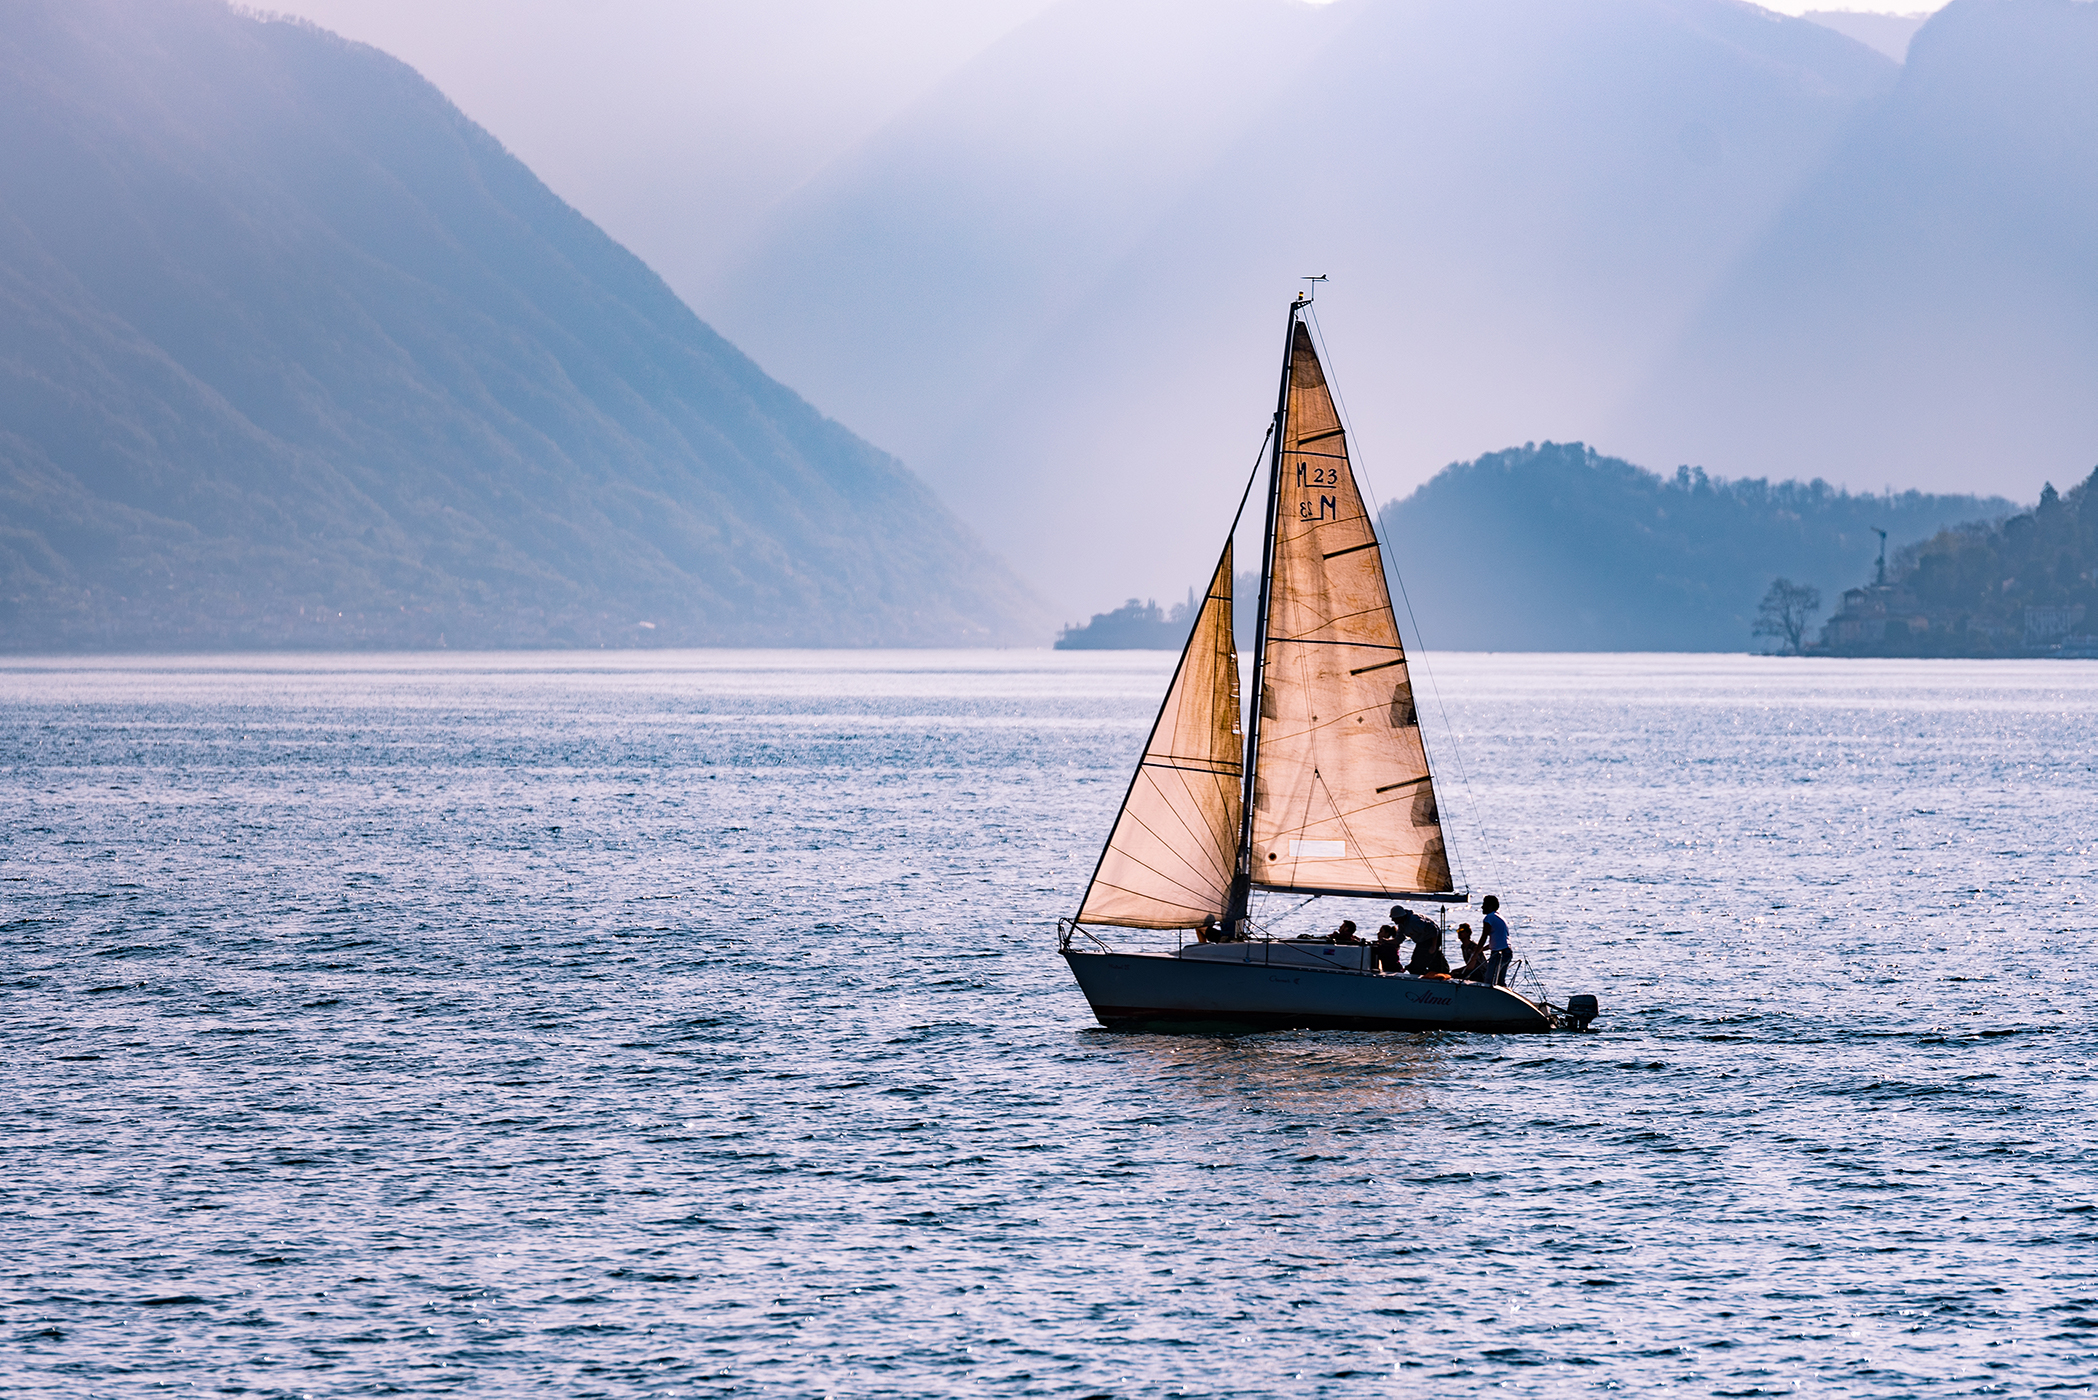 Sailboat on the ocean with mountains